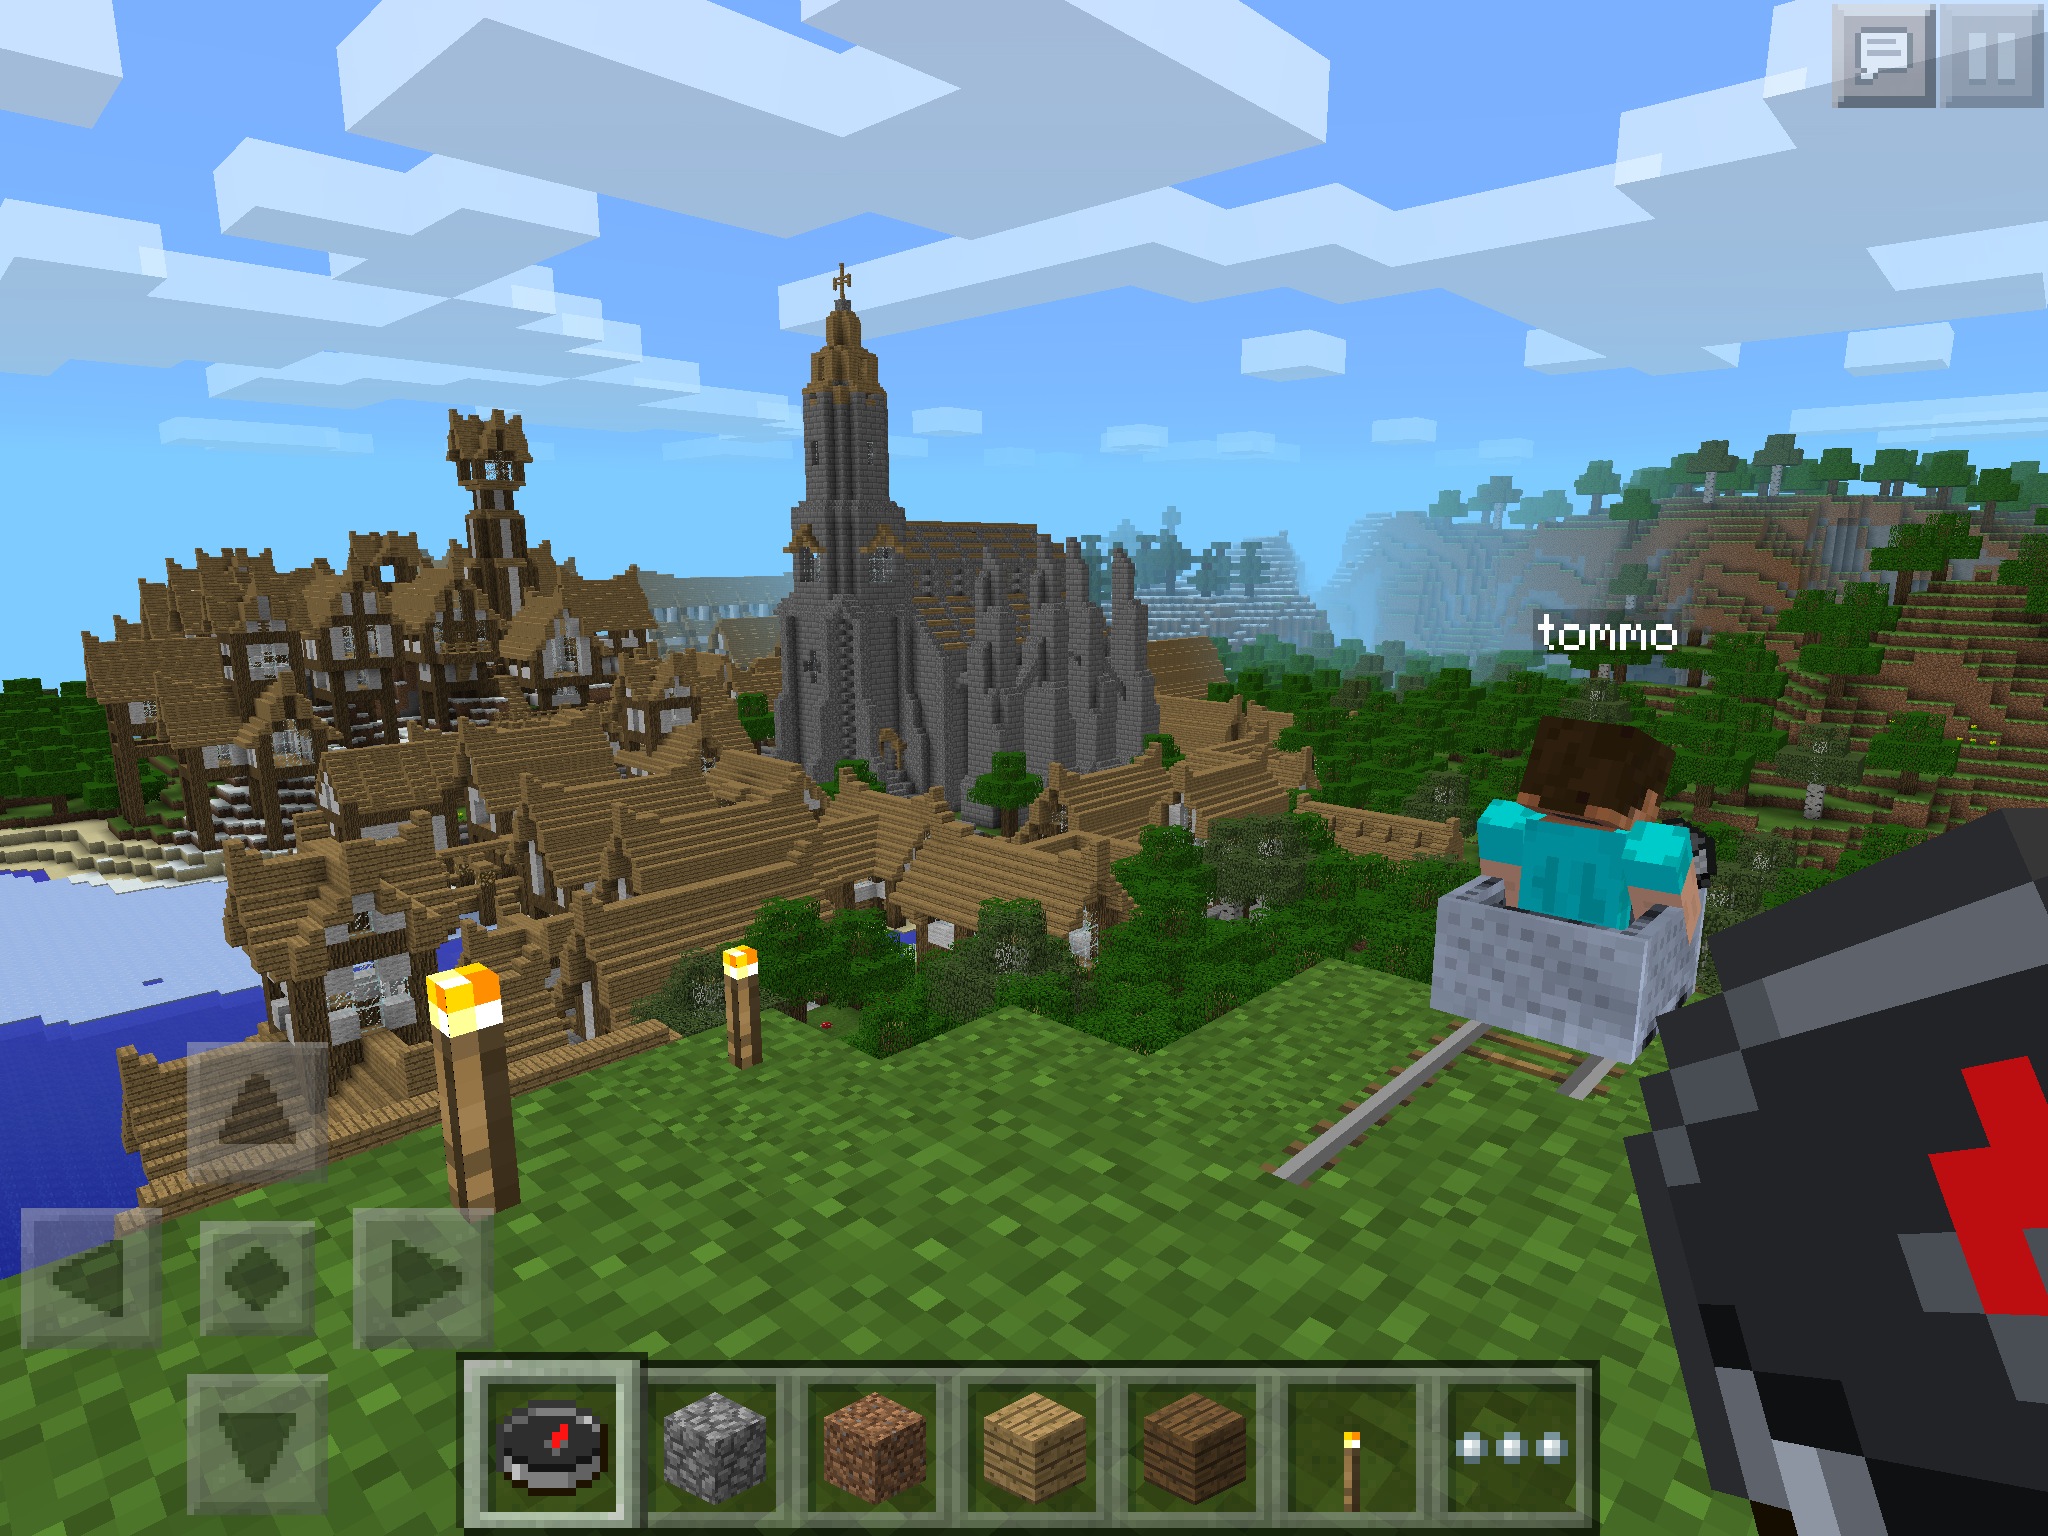 Minecraft Pocket Edition now widely available for Android devices